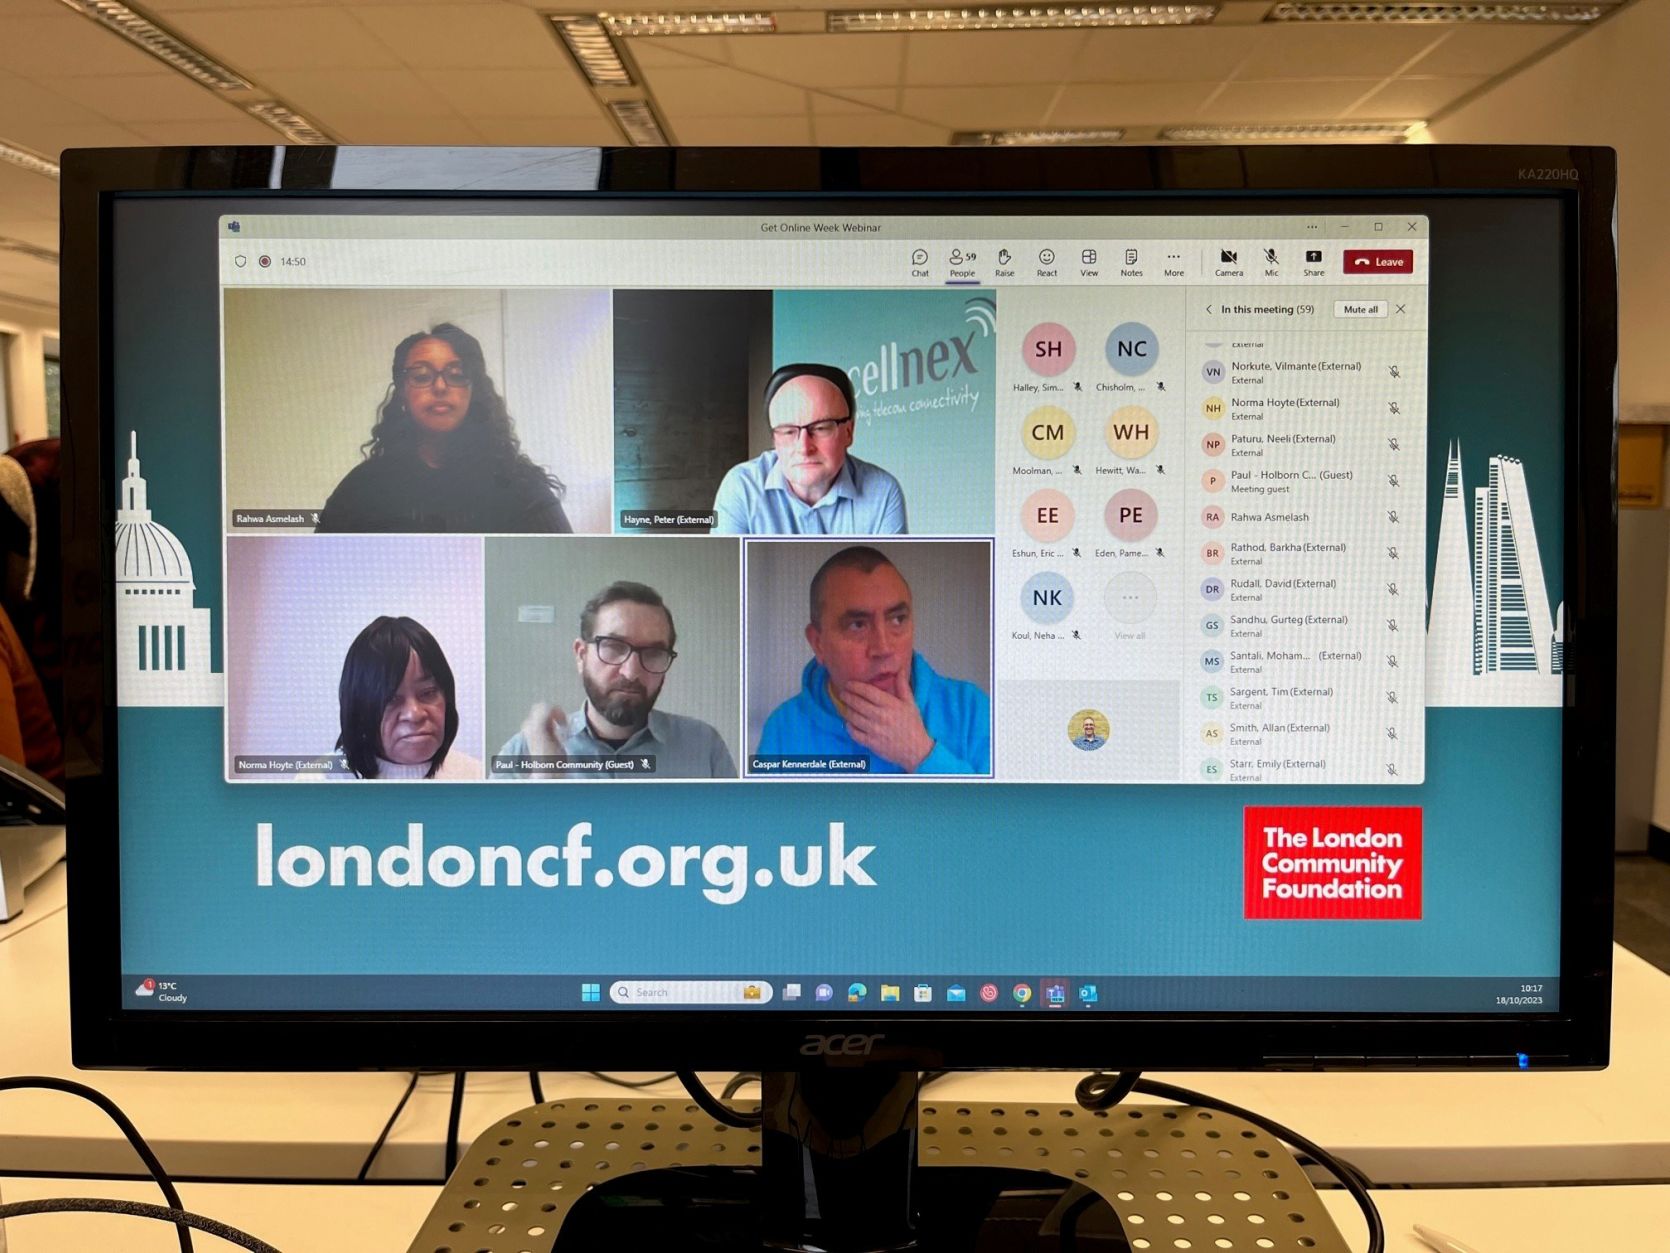 A screen shot of the Cellnex webinar featuring five different speakers and the accompanying chat window. Behind on the background of the screen can be seen a white London skyline and the words 'londoncf.org.uk'.